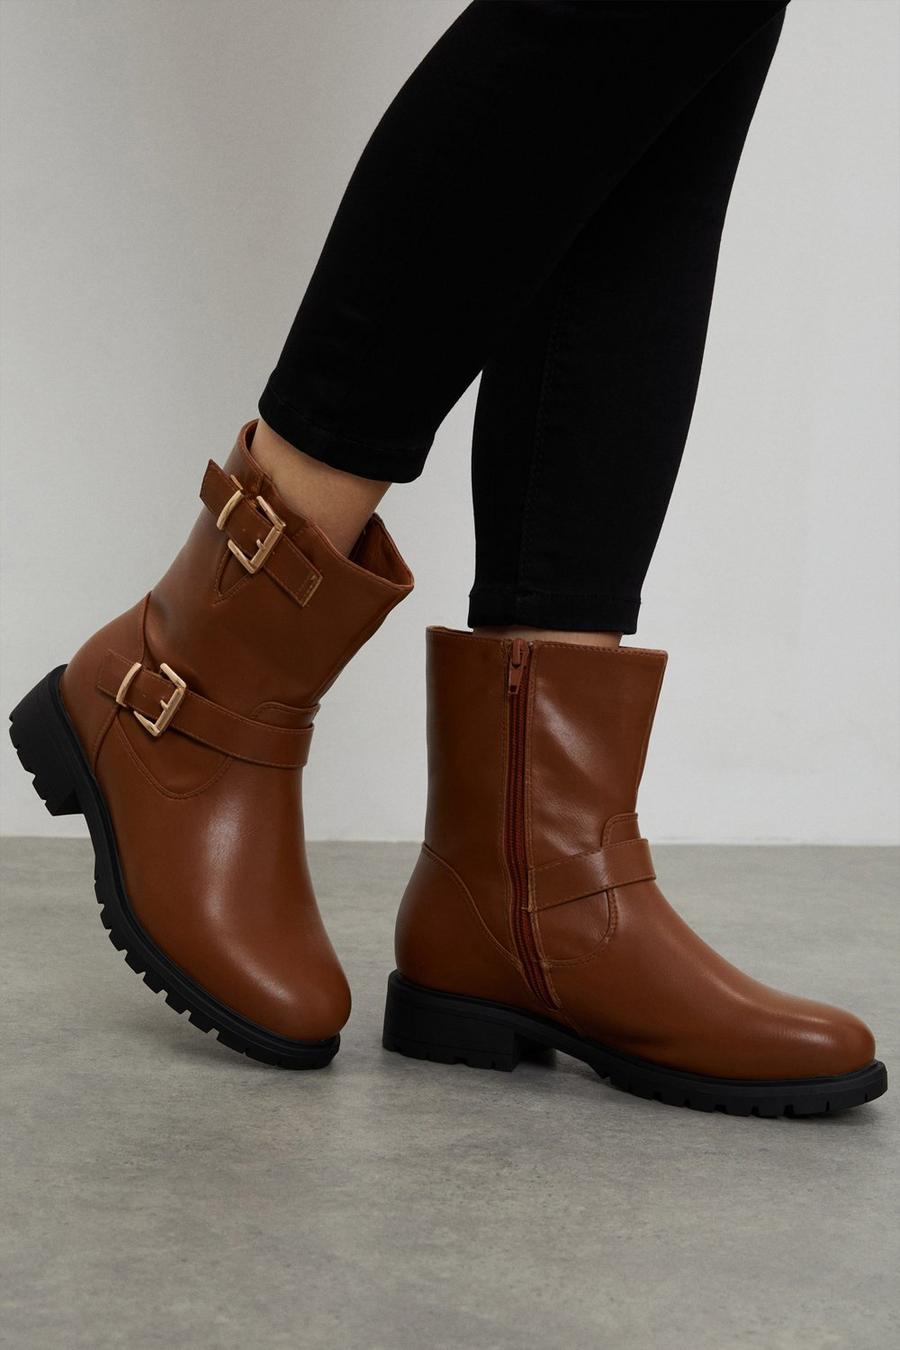 Good For The Sole: Wide Fit Monet Comfort Biker Boot